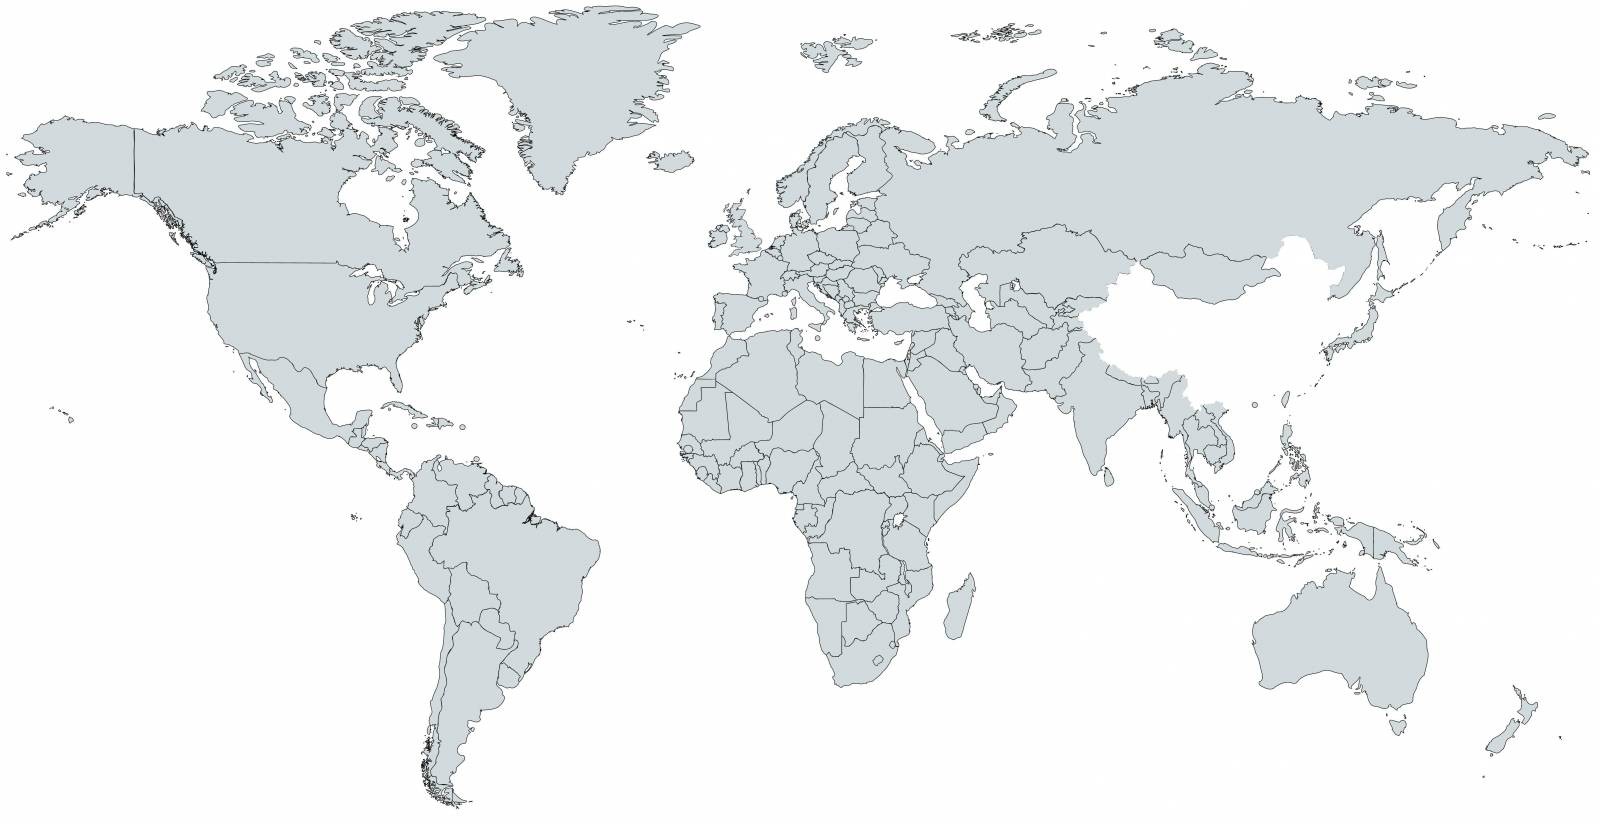 The world's most peaceful world map is here wwwwwwwwwwwwwwwwwwwwwwwww